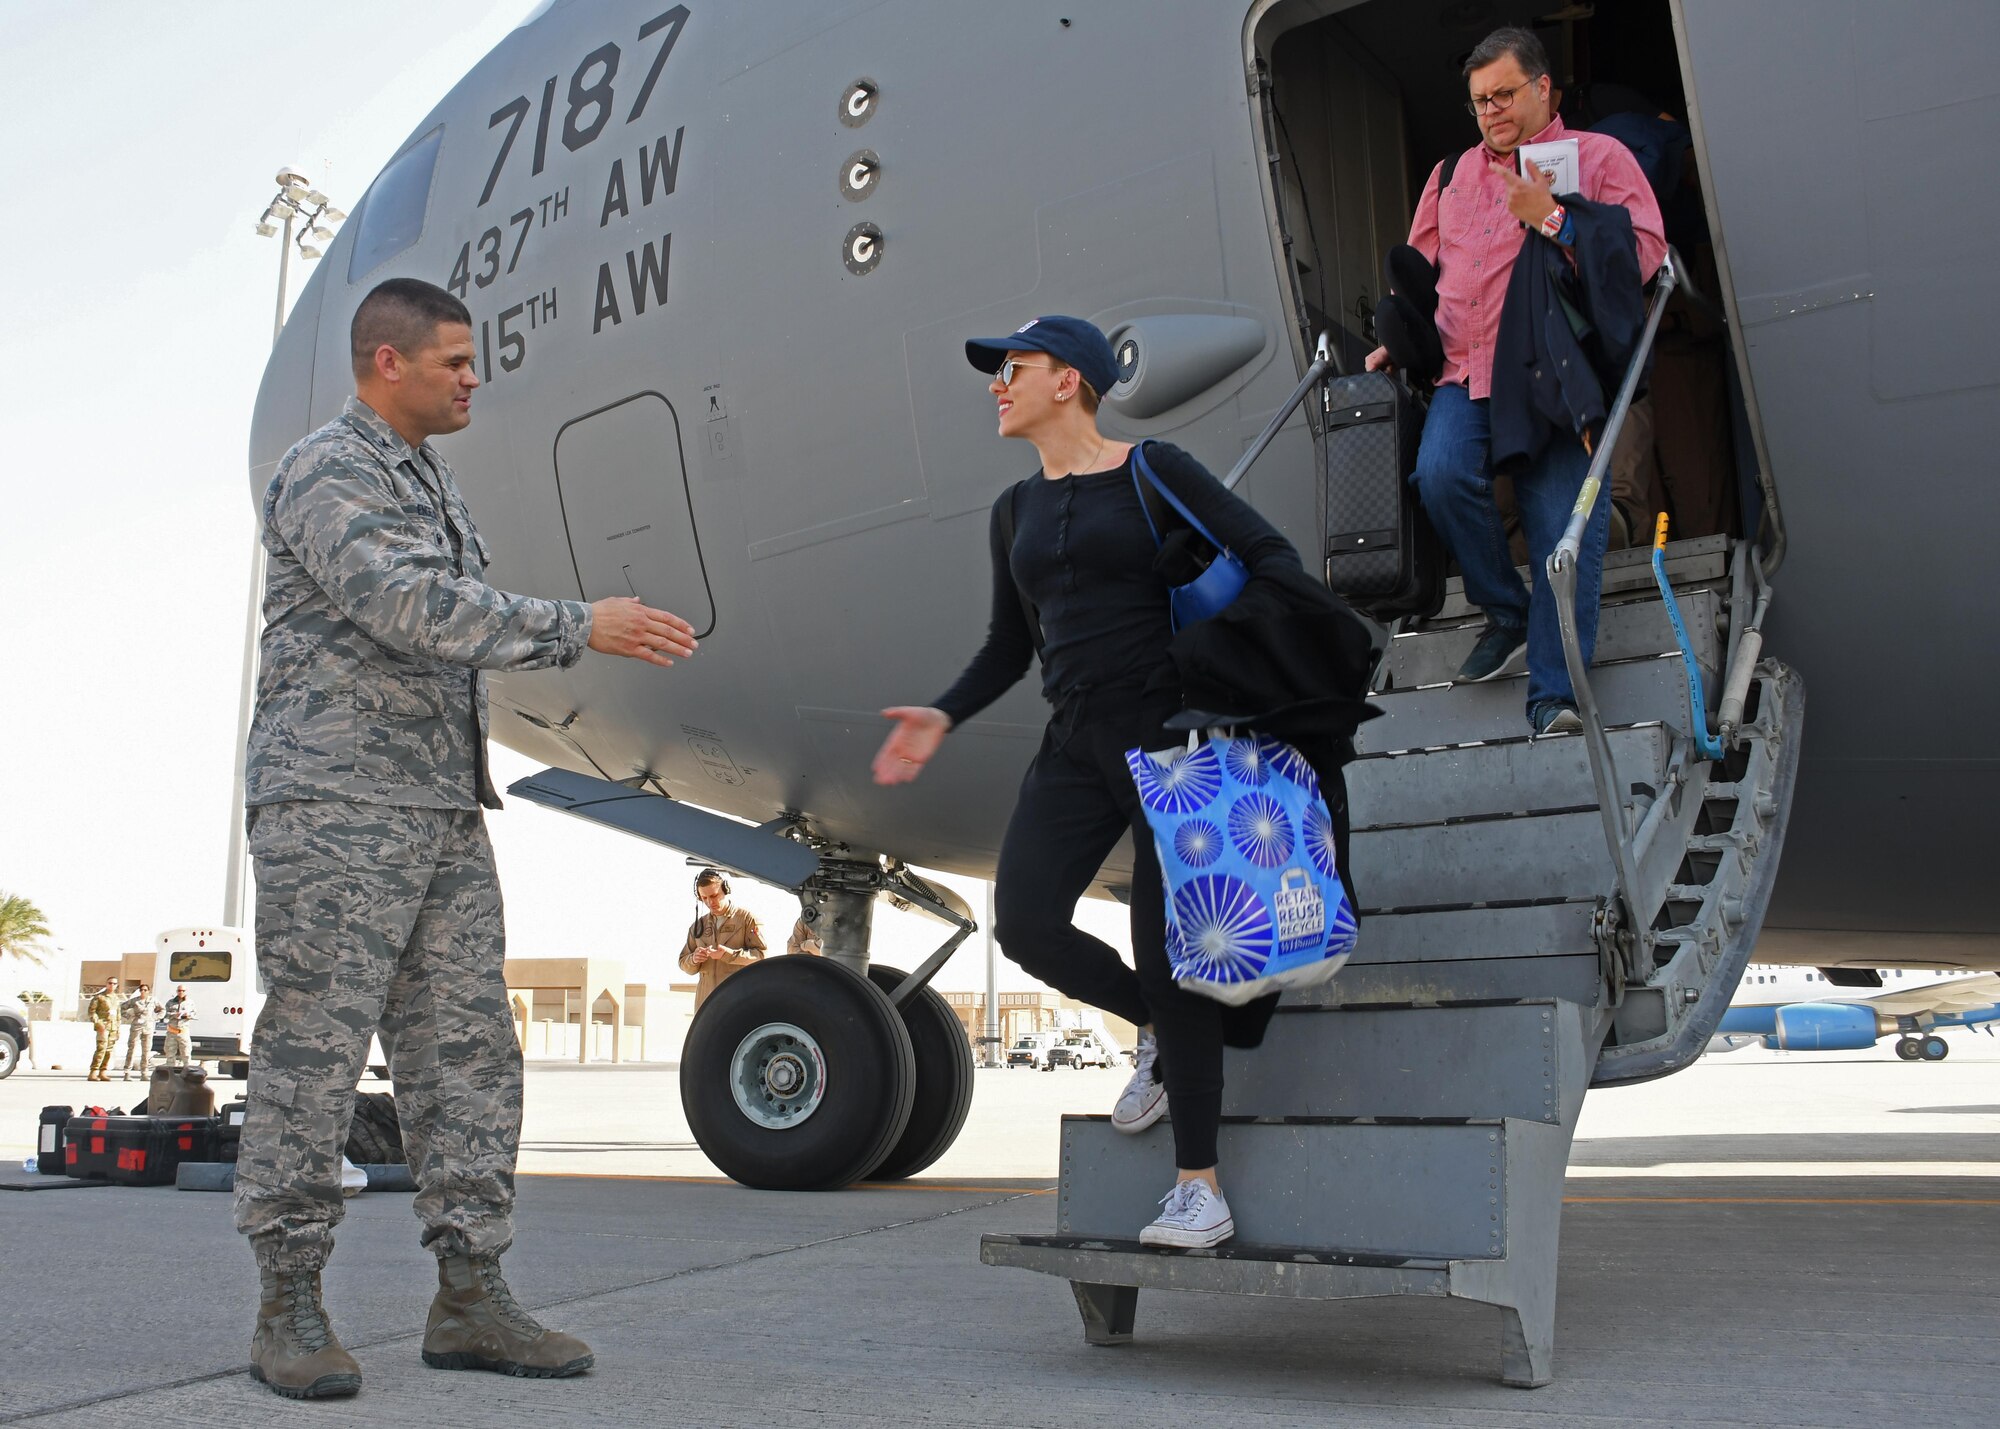 U.S. Air Force Col. Jeffrey Engelker, 379th Air Expeditionary Wing vice commander, greets actress Scarlett Johansson as she disembarks from a C-17 Globemaster at Al Udeid Air Base, Qatar, Dec. 6, 2016. Engelker greeted the celebrities, support personnel and USO staff who had come to Al Udeid as part of a holiday USO tour. (U.S. Air Force photo by Senior Airman Miles Wilson)